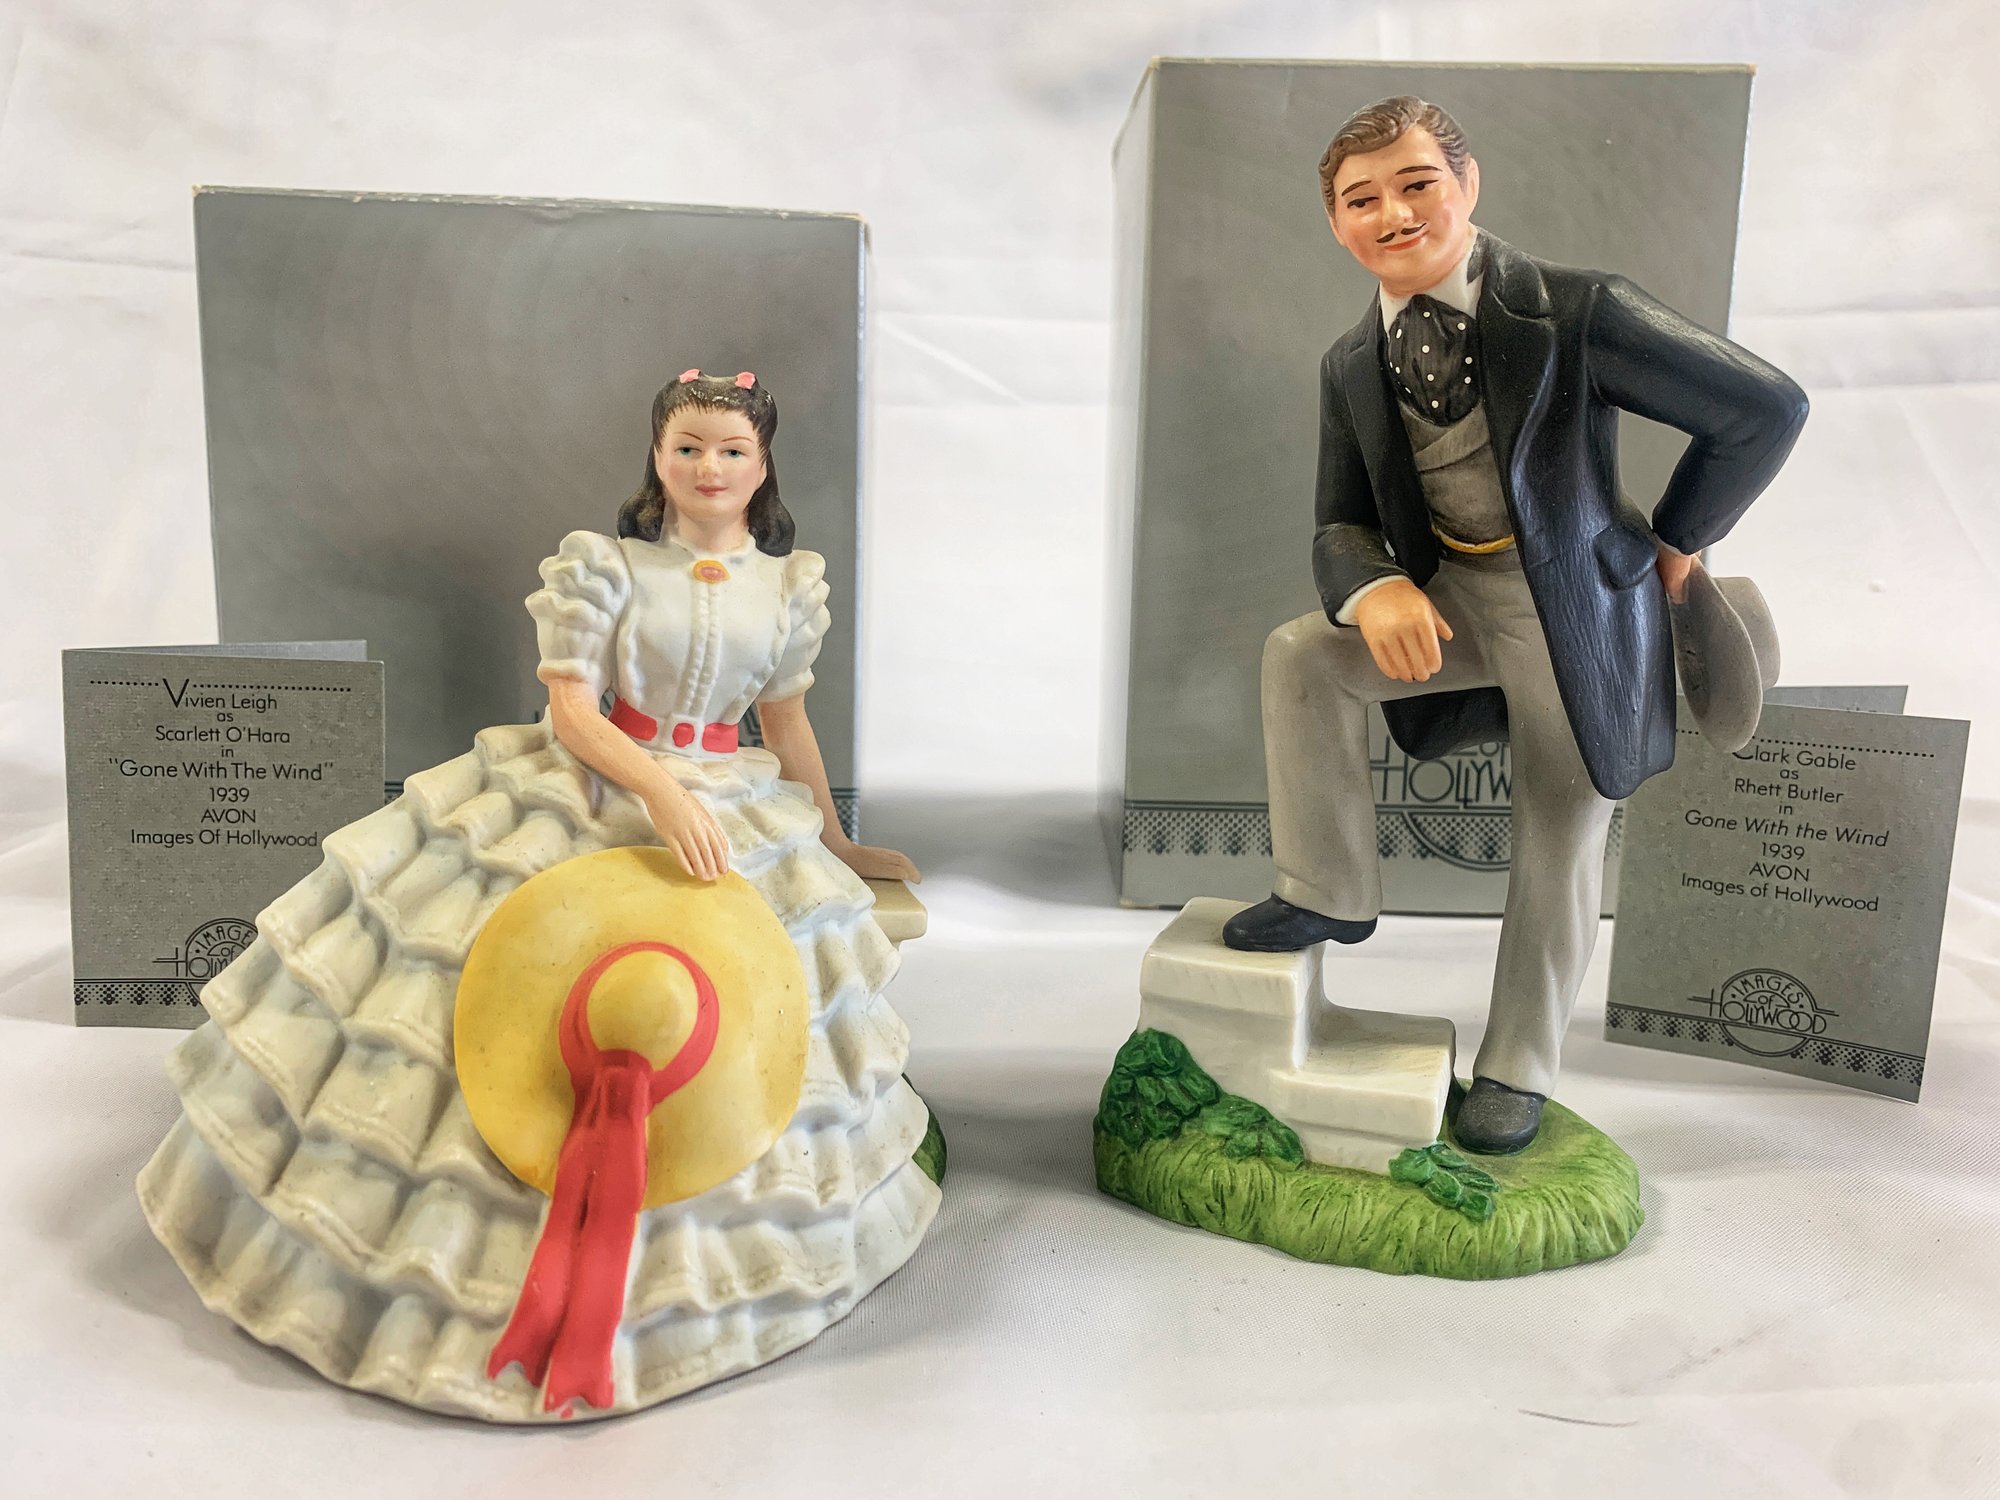 Gone With The Wind Figurines - Images Of Hollywood Brand #1316 ...